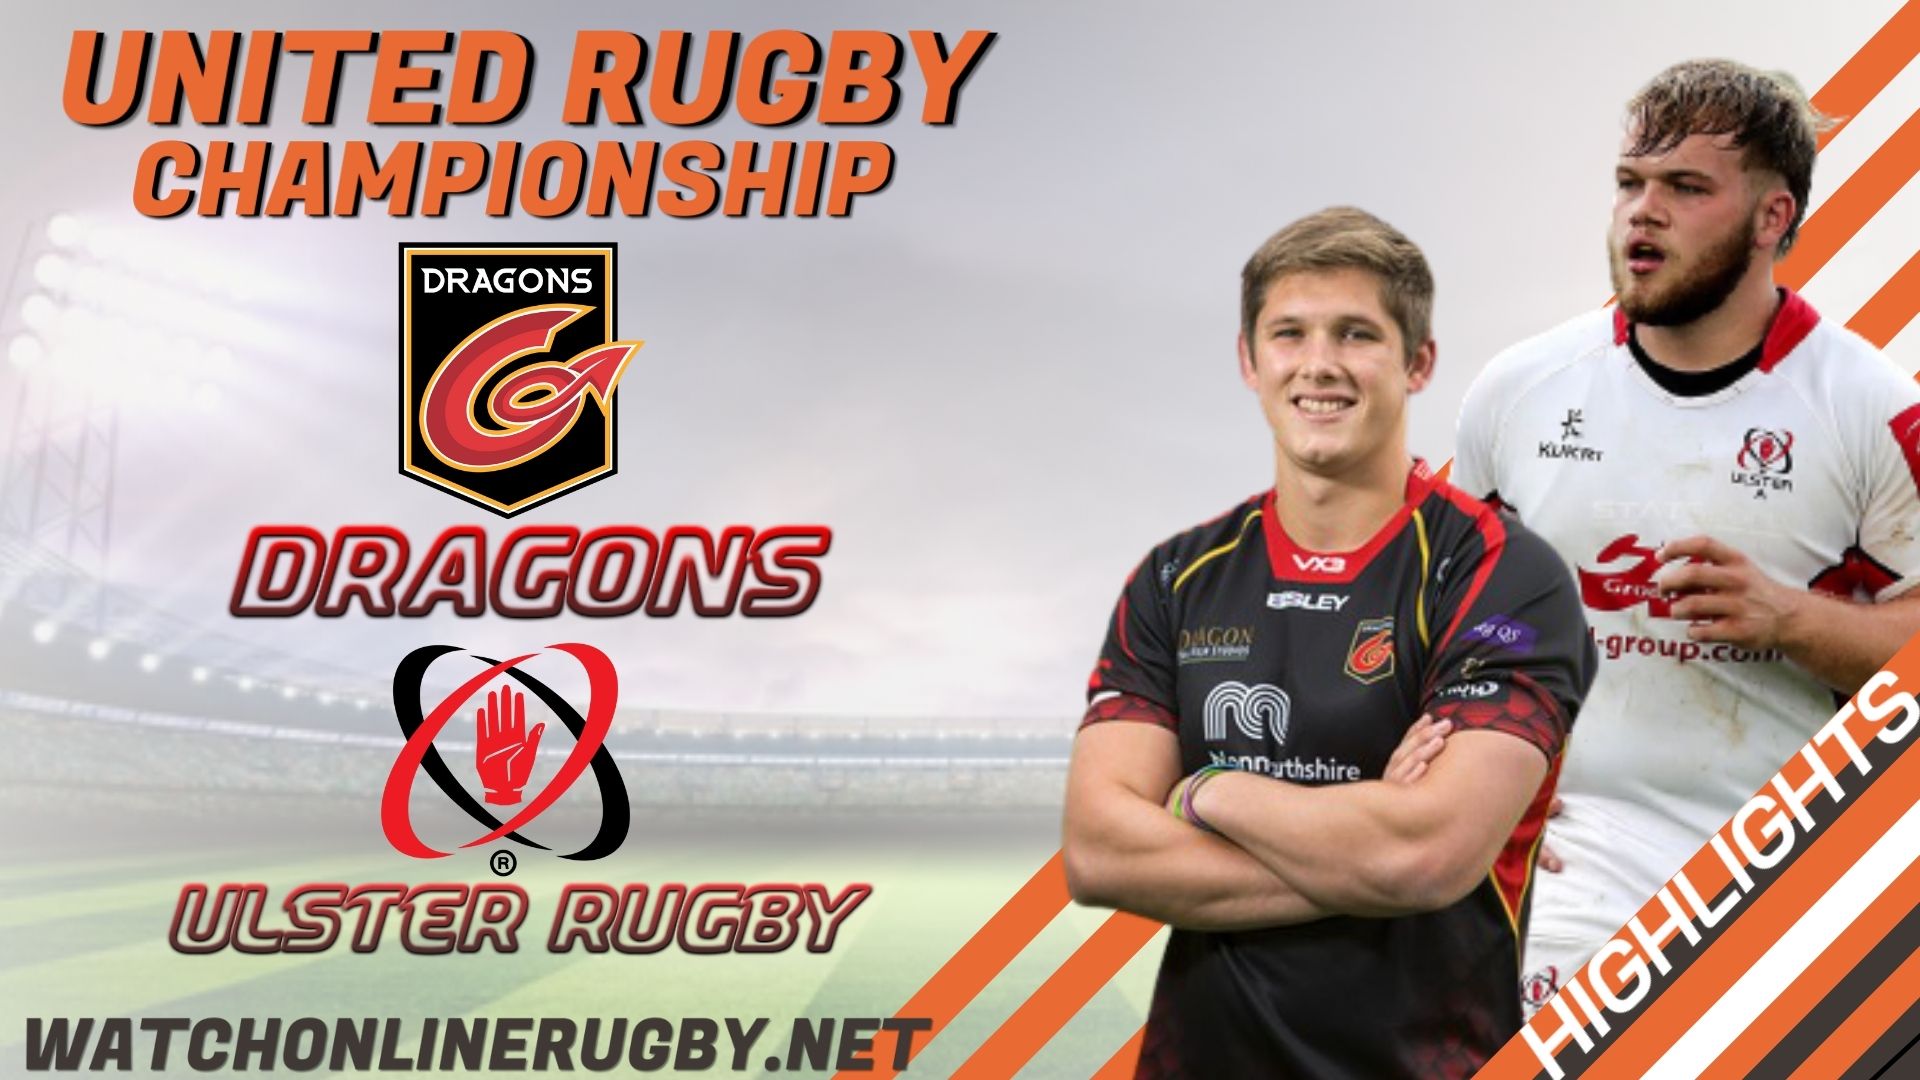 Dragons Vs Ulster United Rugby Championship 2022 RD 12